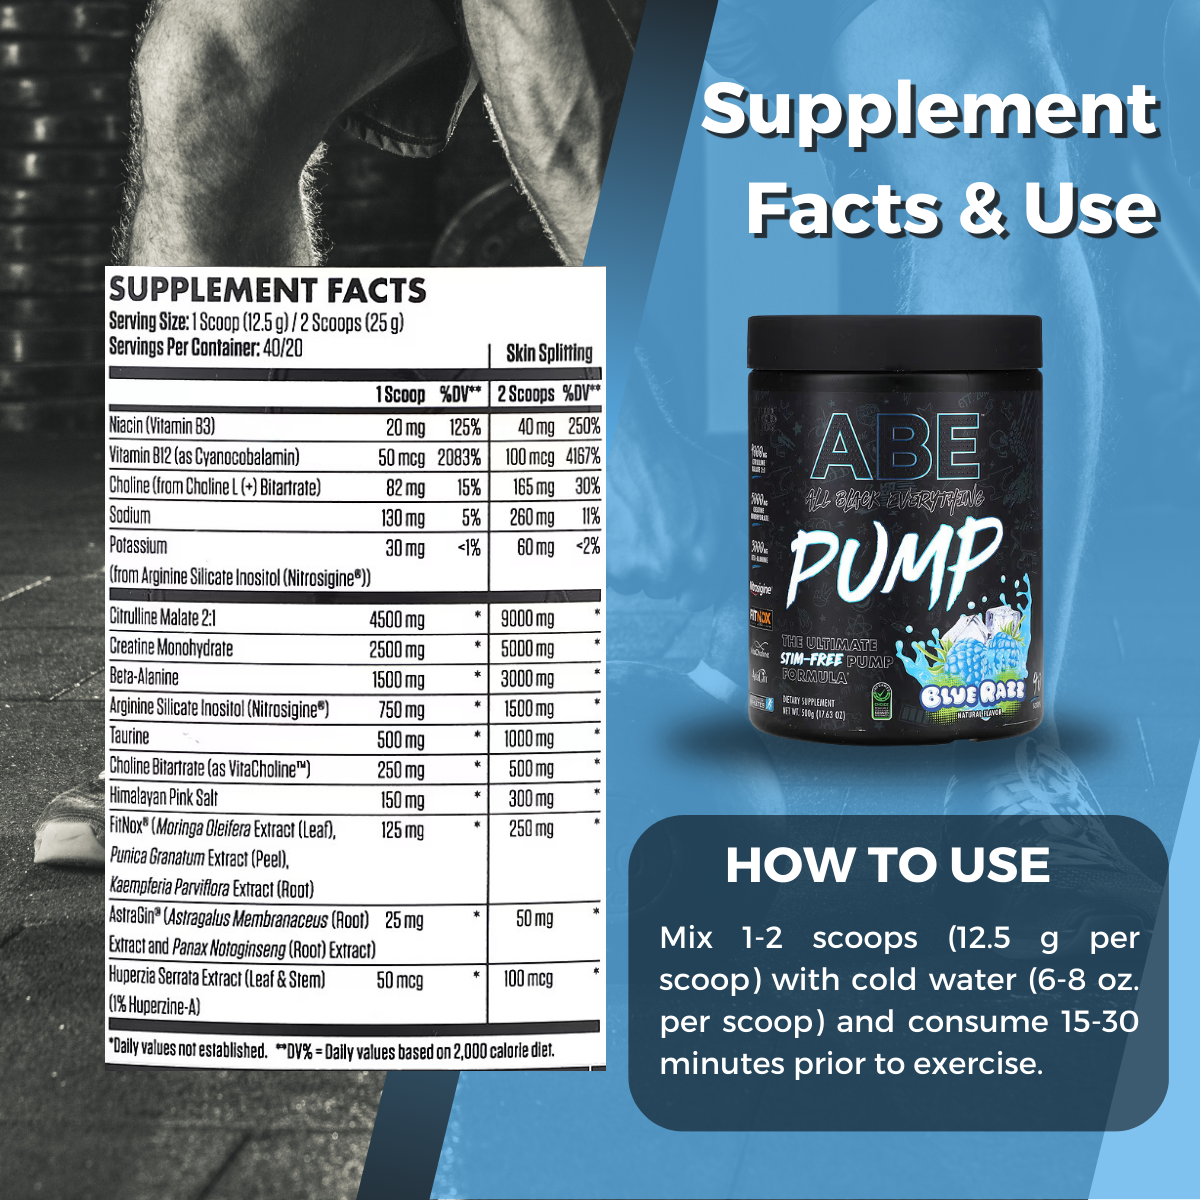 ABE, Pump, Stim-Free Pre Workout Powder, Various Flavor, 17.63 oz (500 g), Supplement Fact And Use